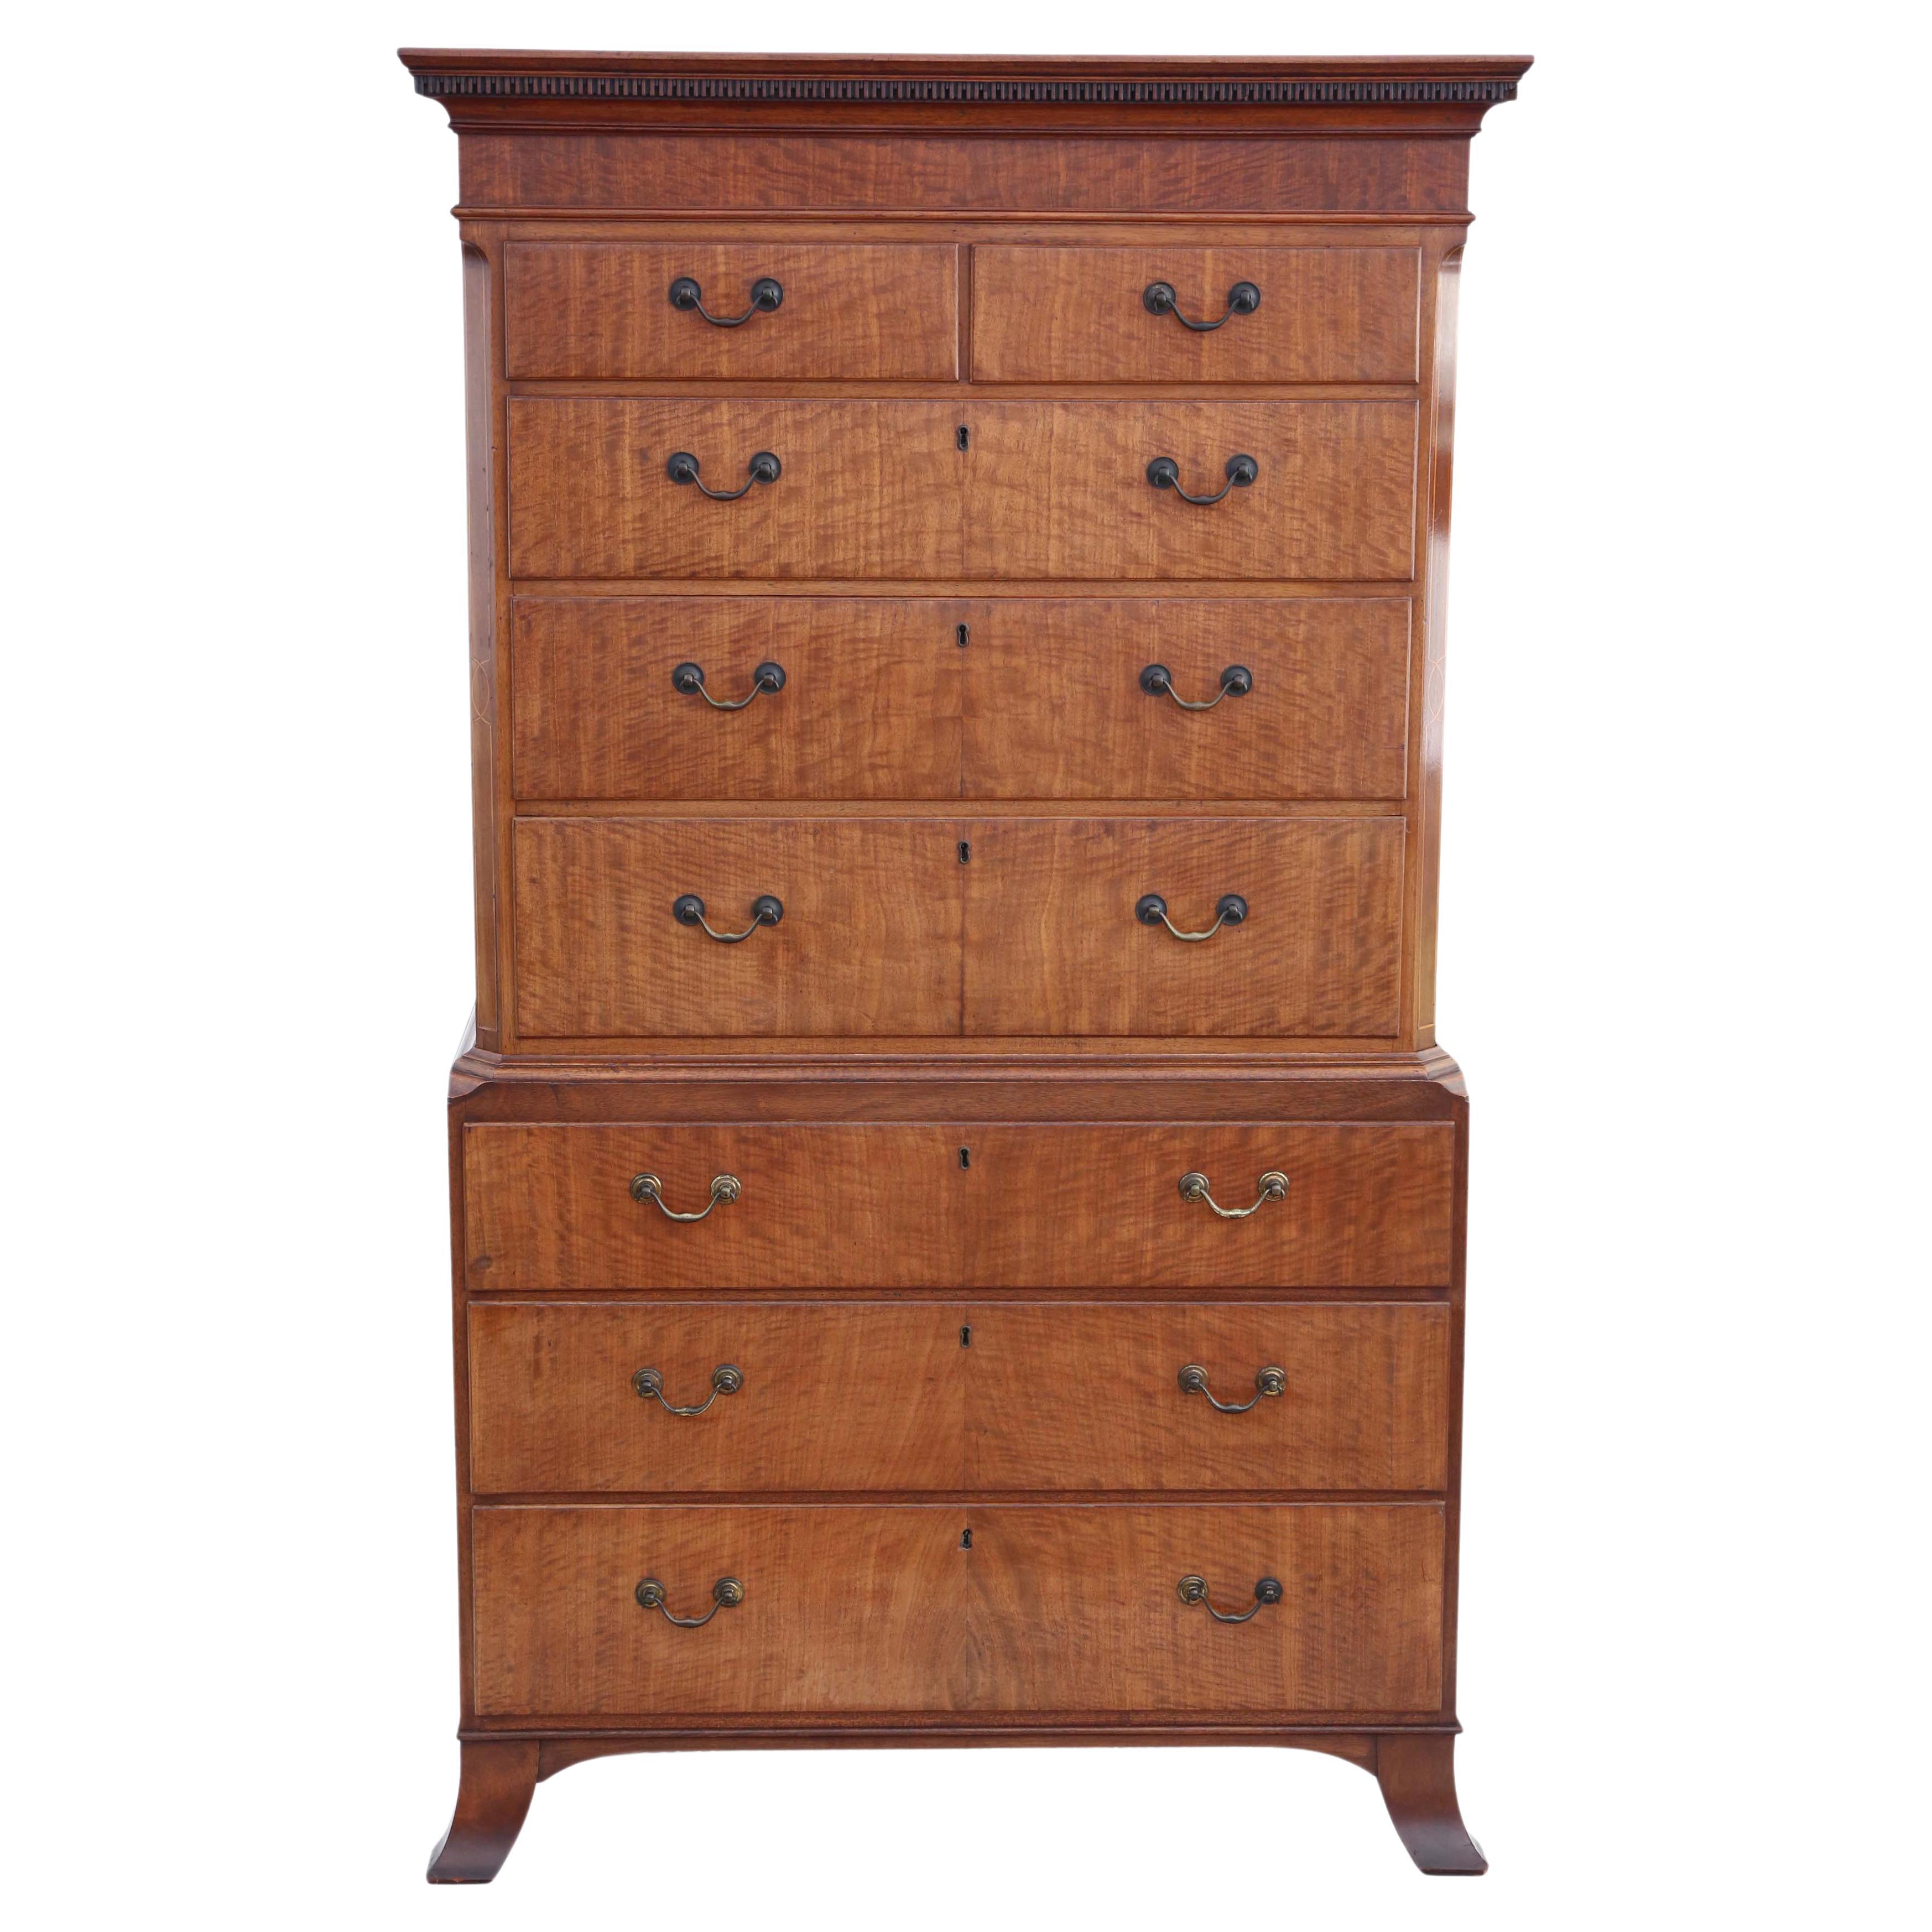 Antique 19th Century Inlaid Mahogany Tallboy Chest on Chest of Drawers For Sale